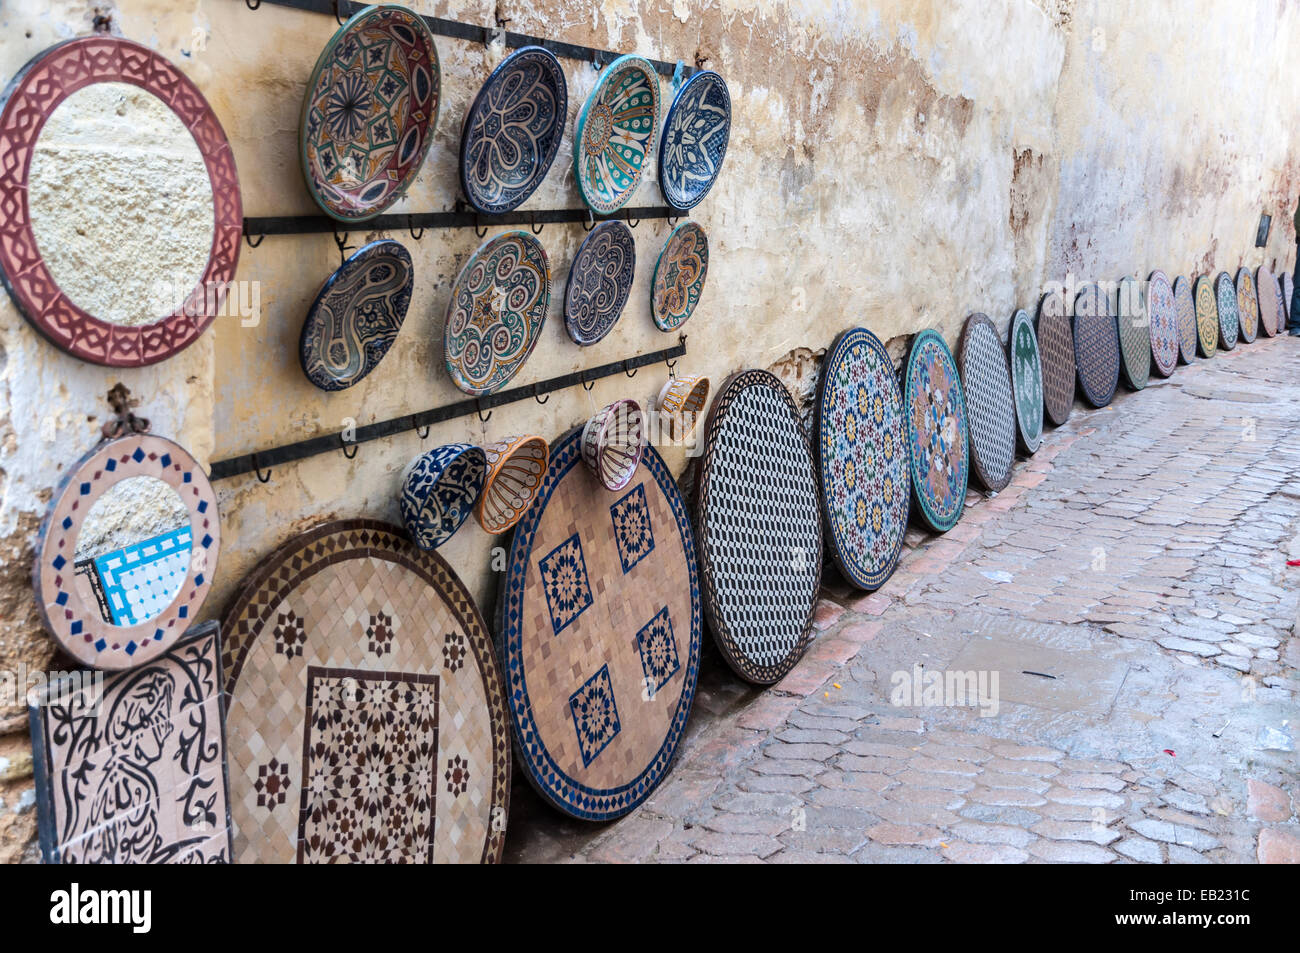 Pottery and souvenirs market in the medina of Fez, Morocco, Africa Stock Photo